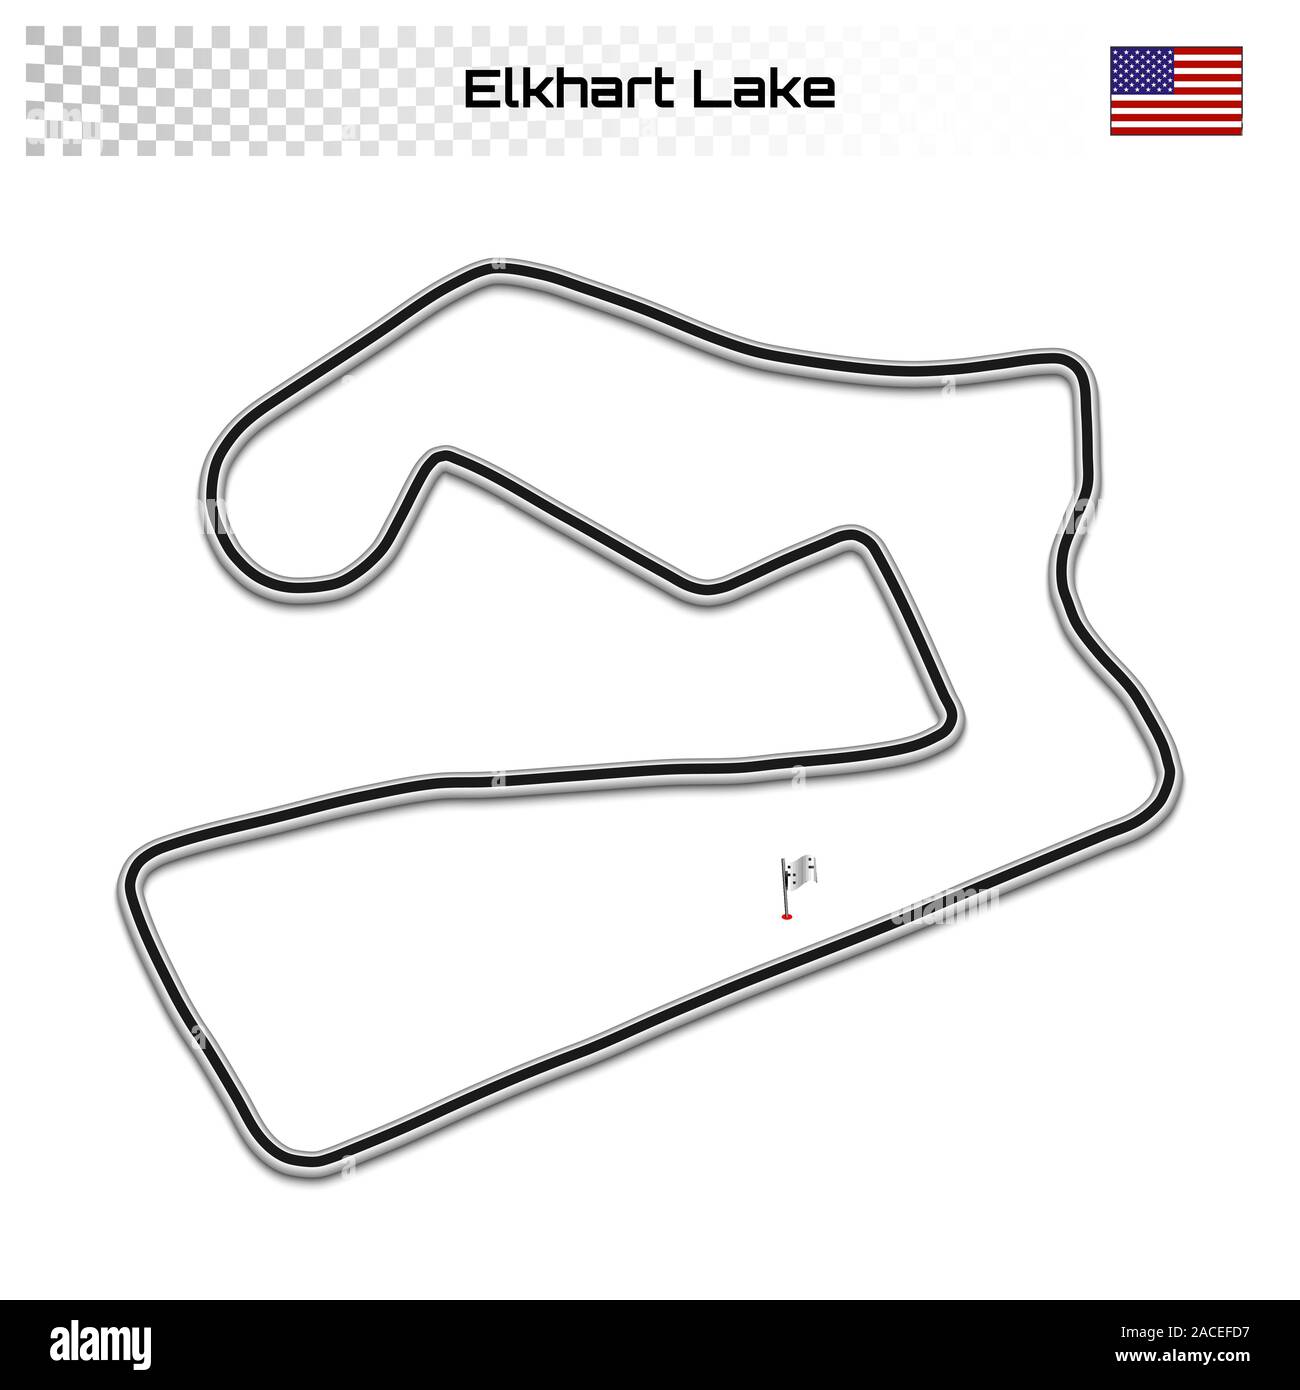 Elkhart Lake circuit for motorsport and autosport.American grand prix race track. Stock Vector